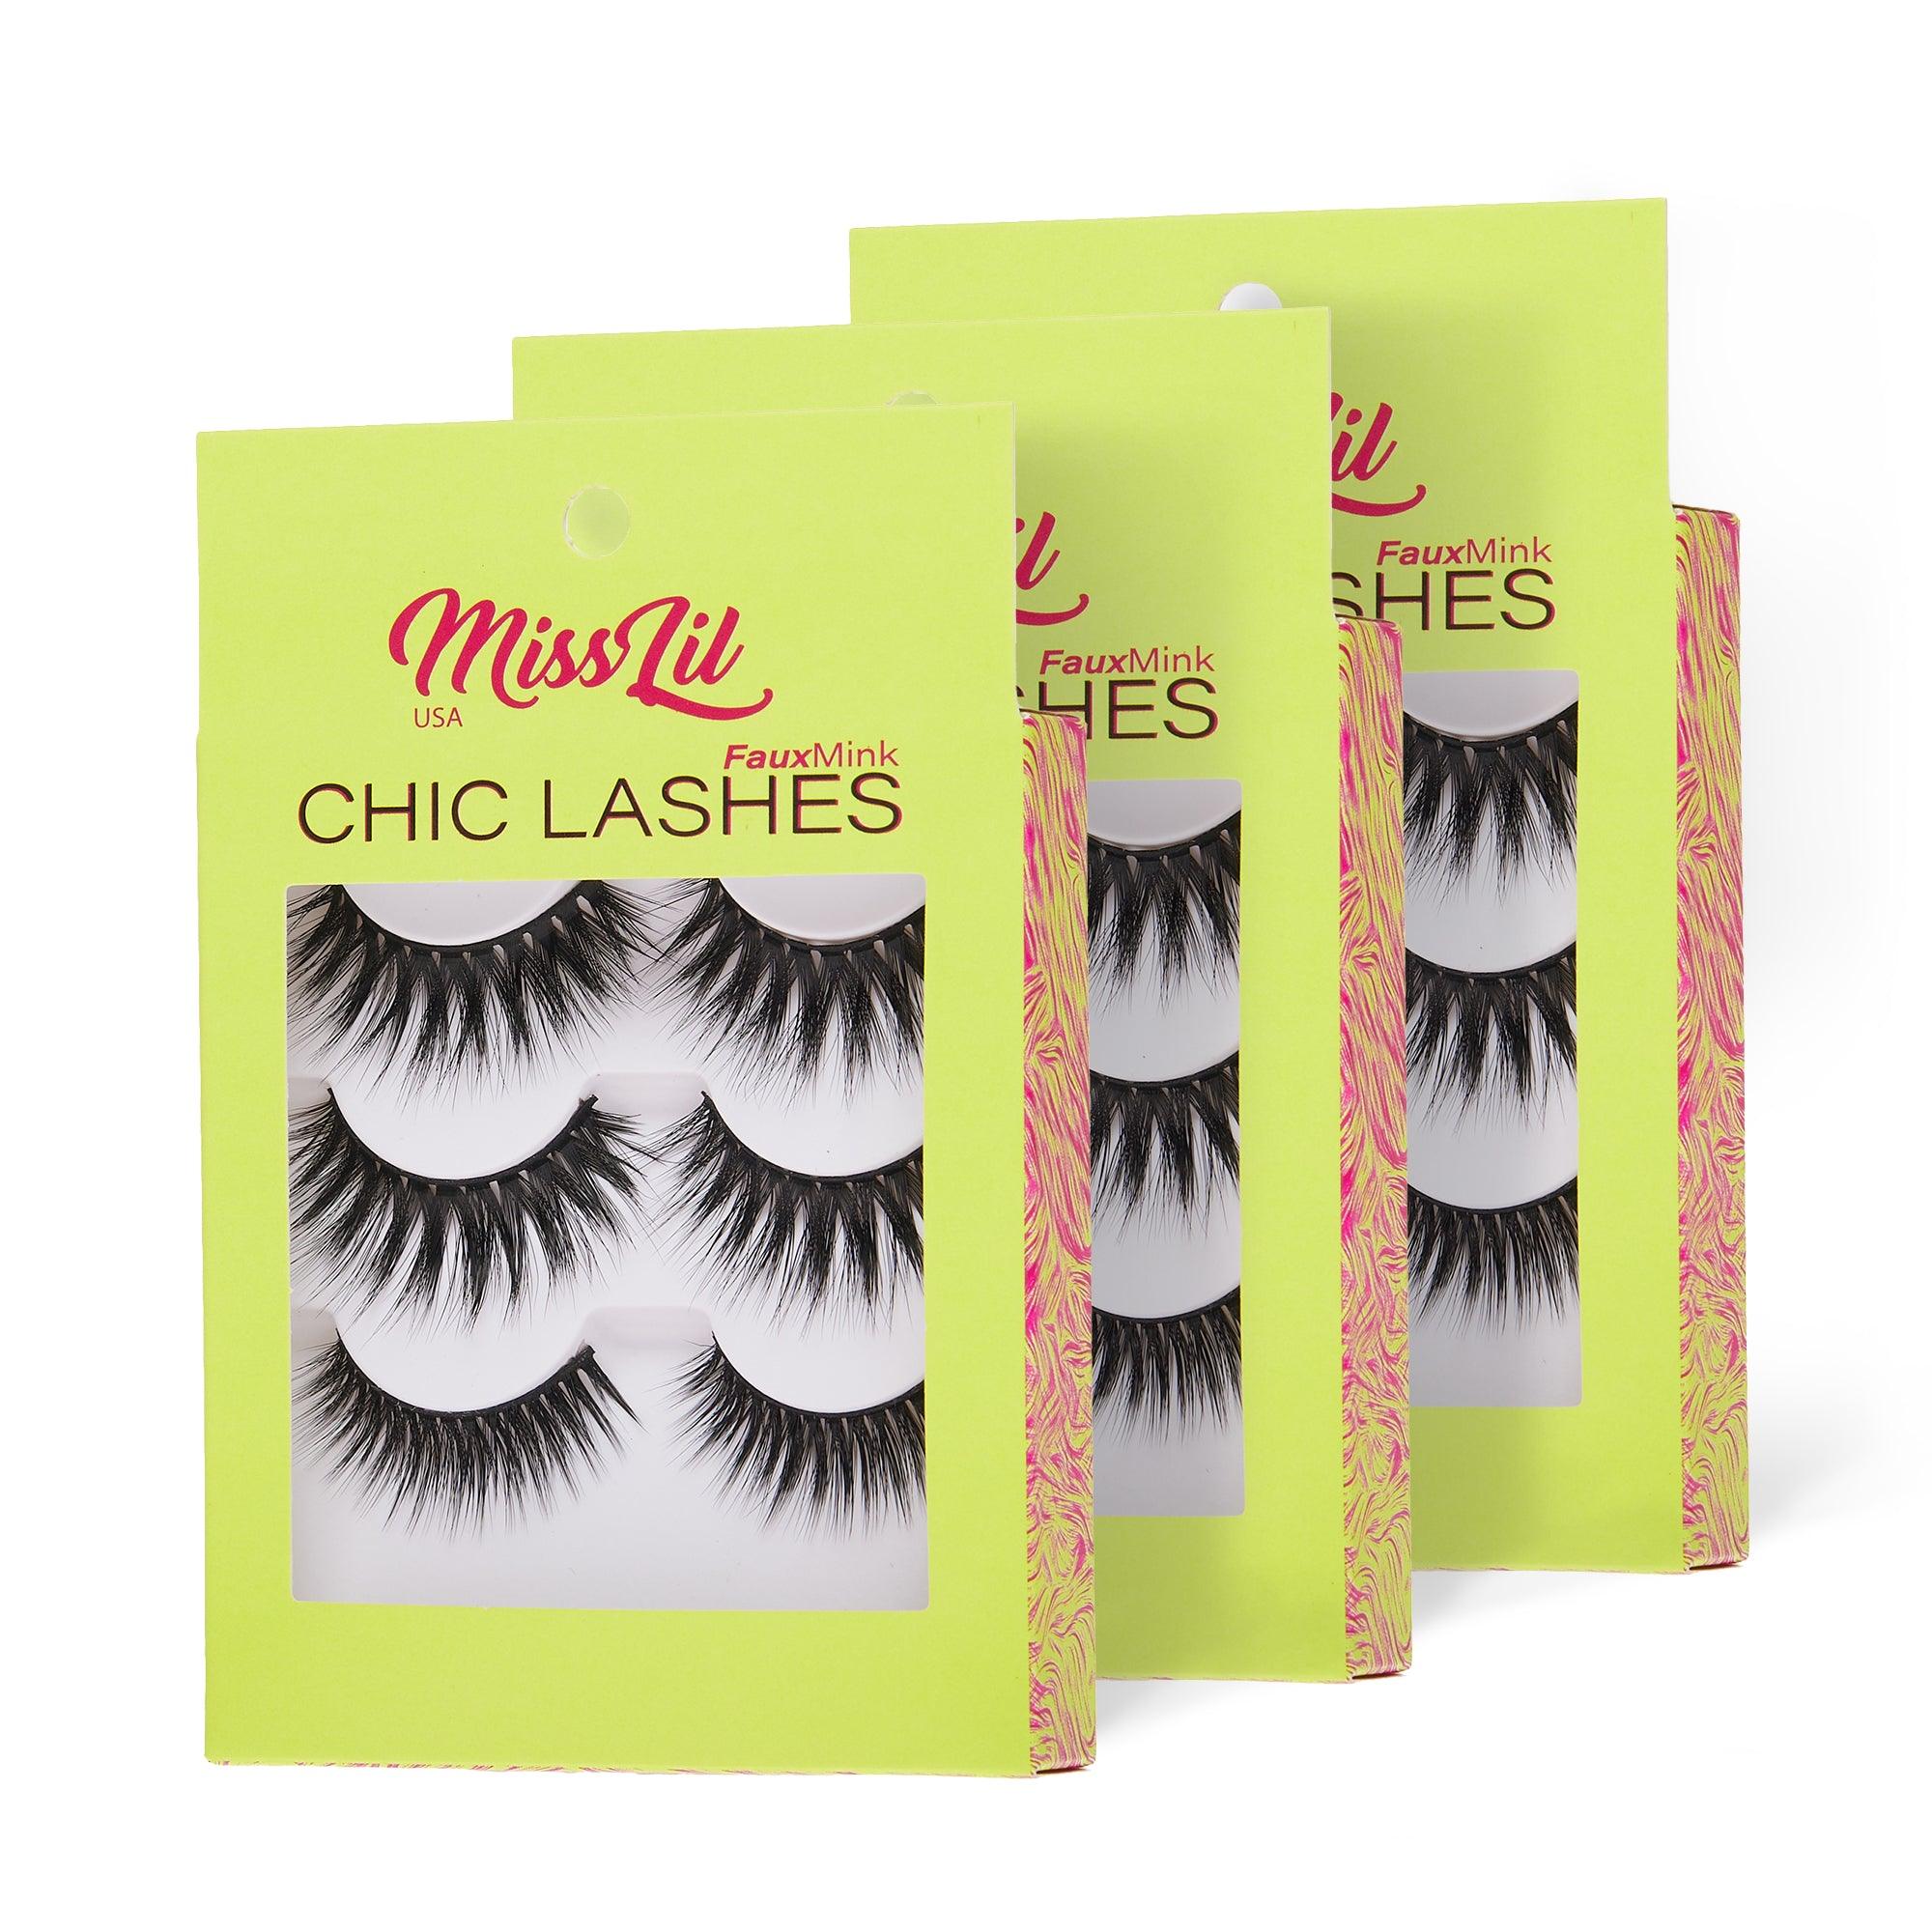 3-Pair Faux Mink Eyelashes - Chic Lashes Collection #34 - Pack of 3 - Miss Lil USA